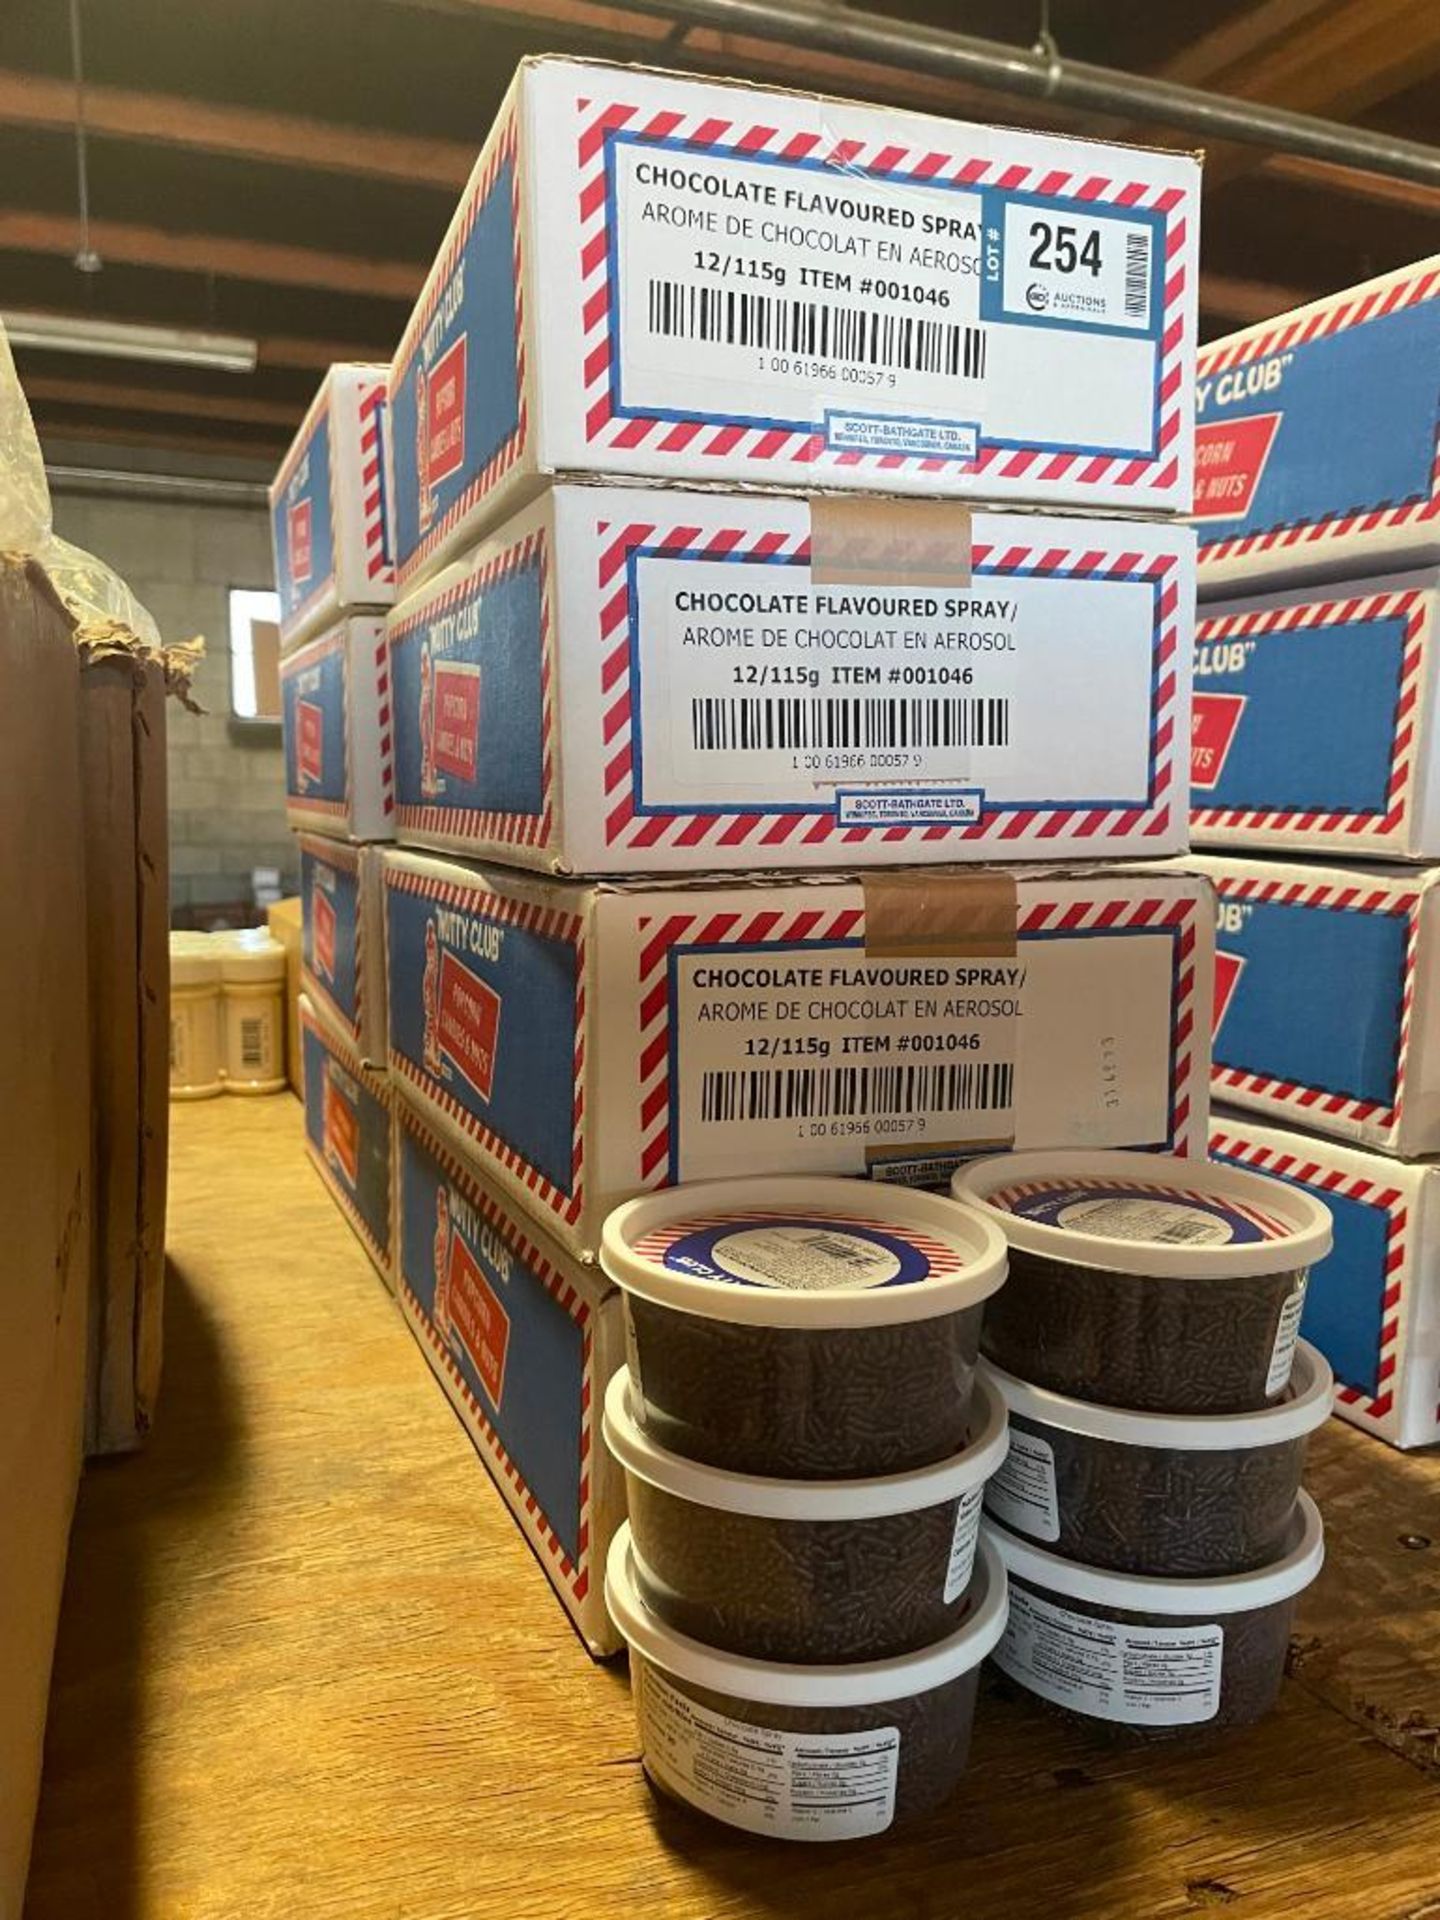 (8) BOXES OF NUTTY CLUB CHOCOLATE SPRINKLES, 12/115G TUBS PER BOX - Image 2 of 3